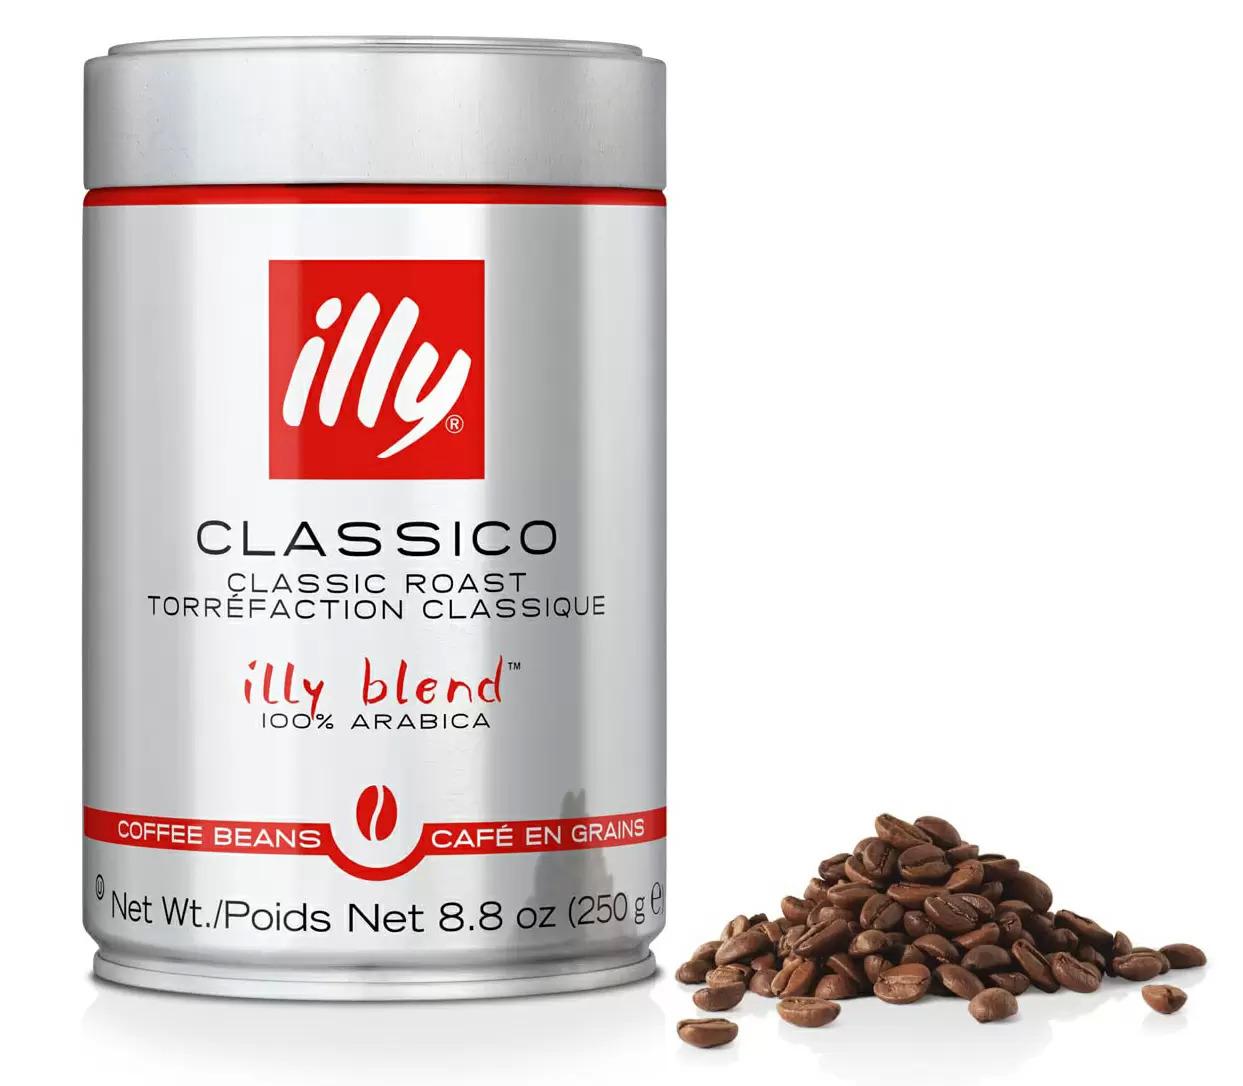 illy Whole Bean Arabica Coffee Can for $6.87 Shipped